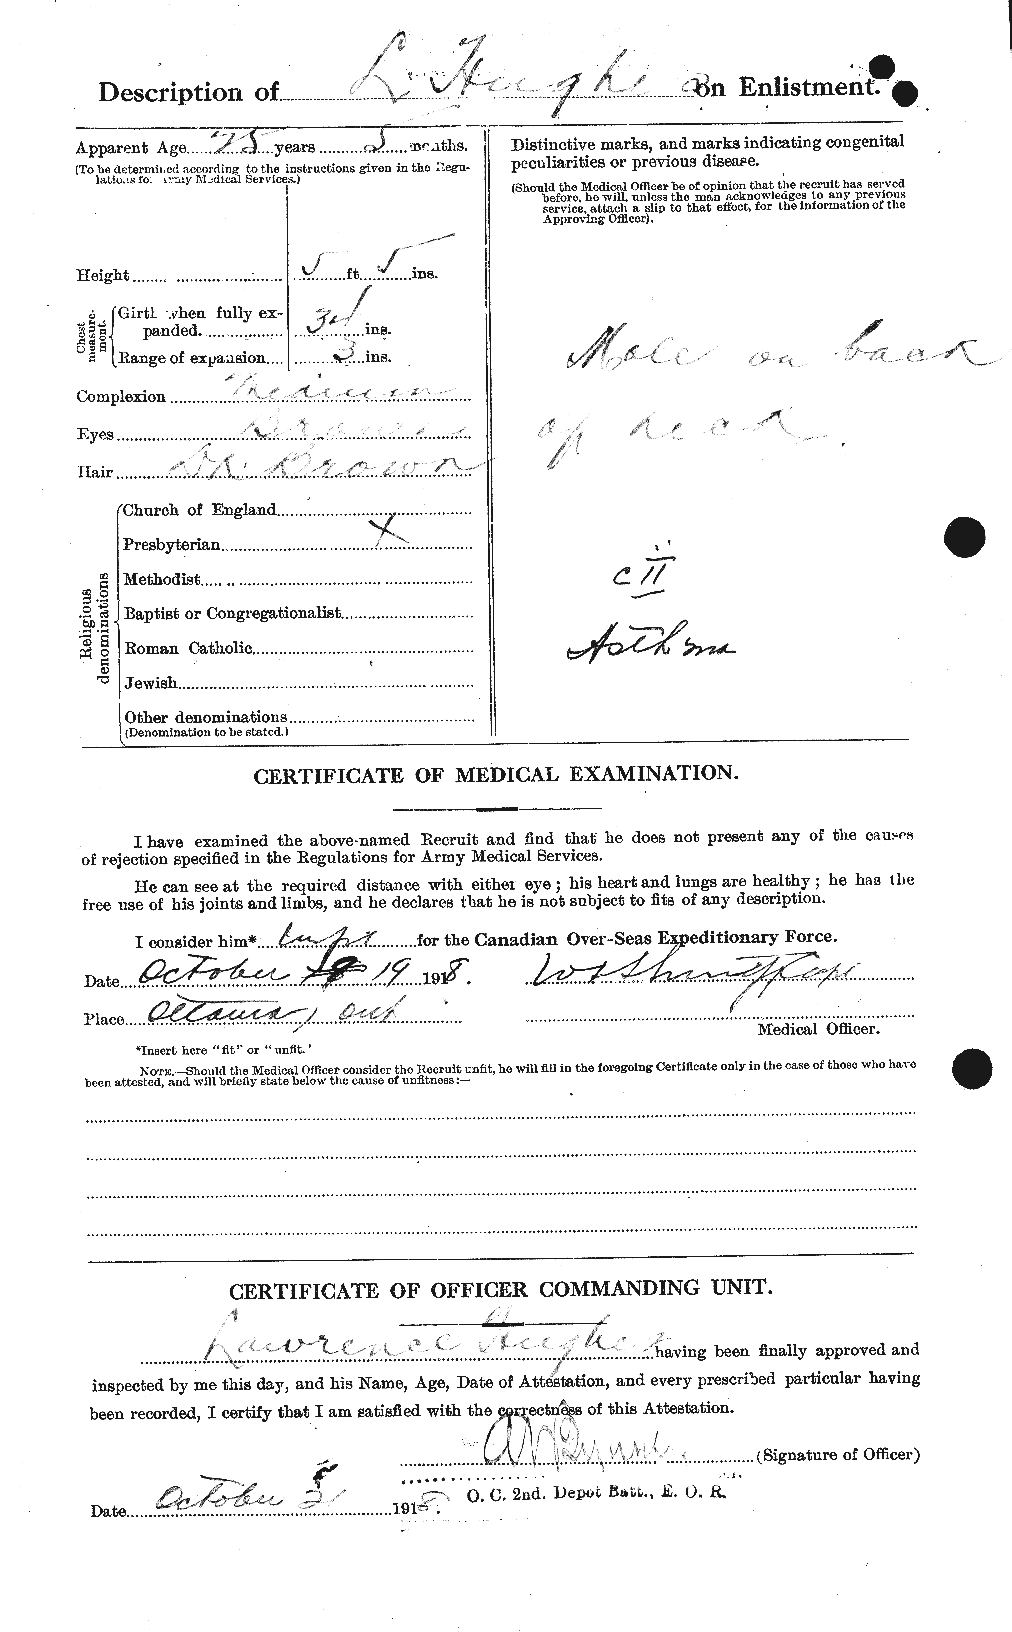 Personnel Records of the First World War - CEF 404096b